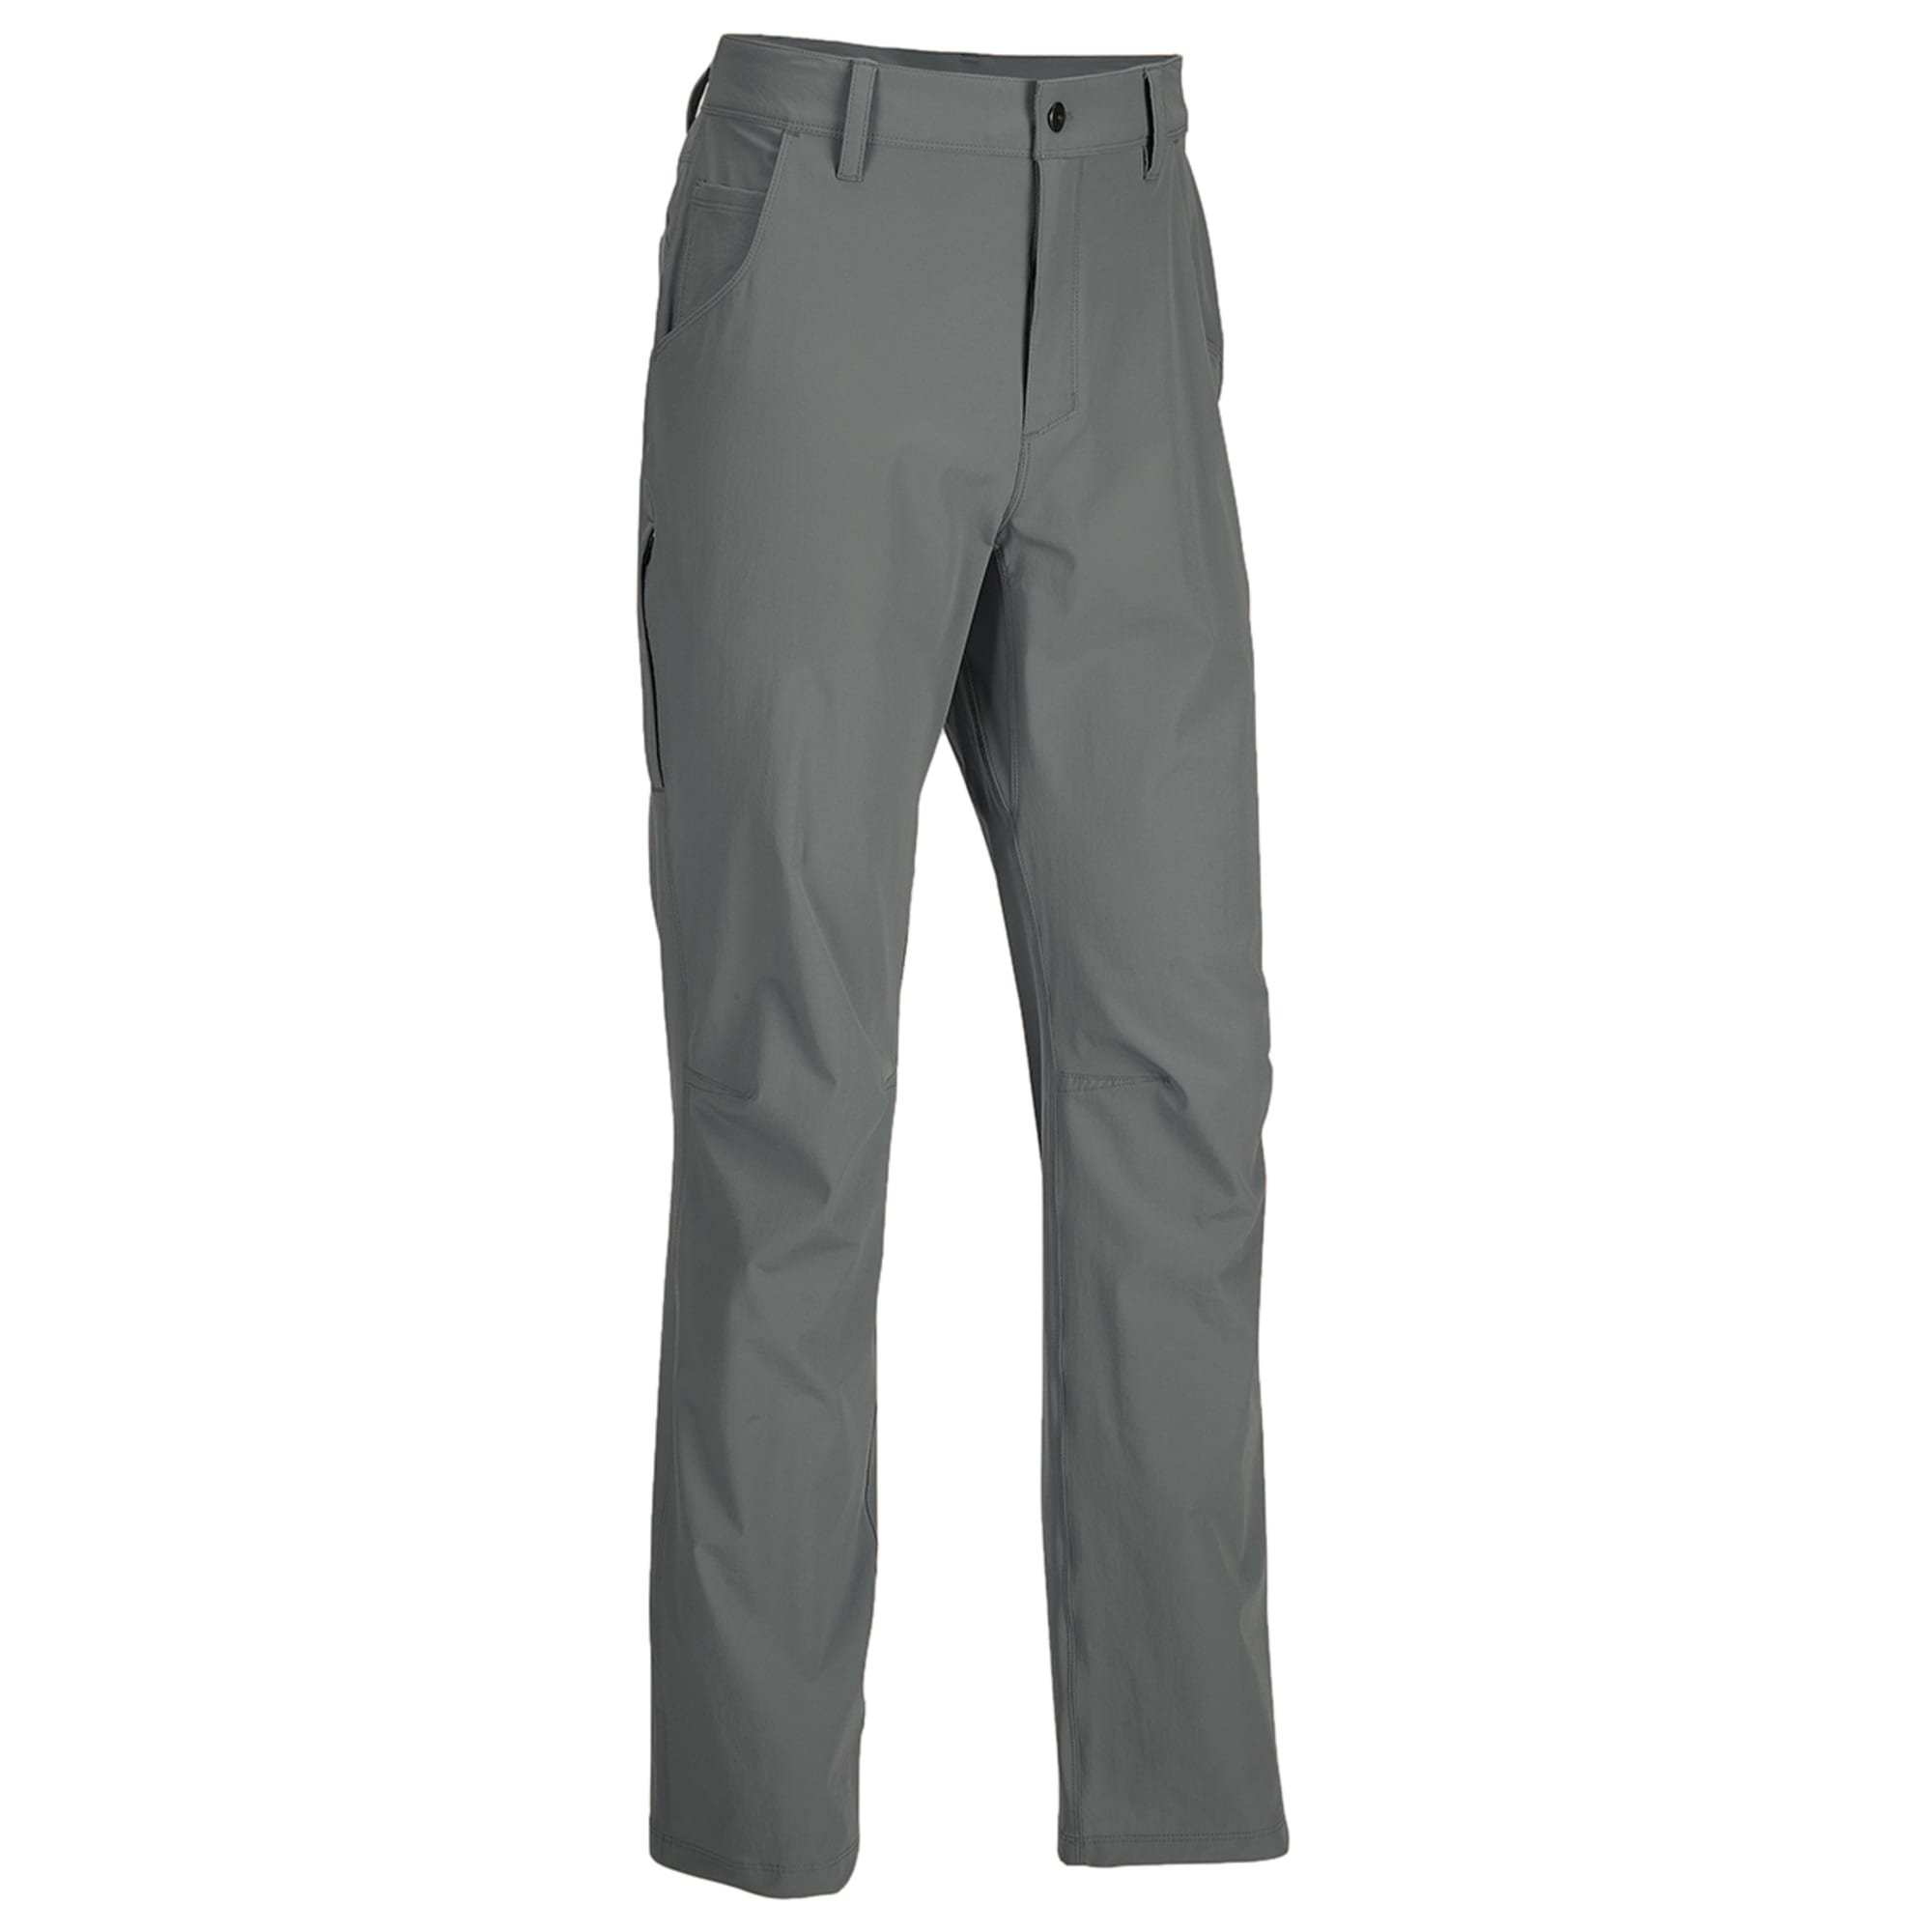 EMS Eastern Mountain Sports Outdoor Walking Trousers New Grey RRP £47 Size:  12